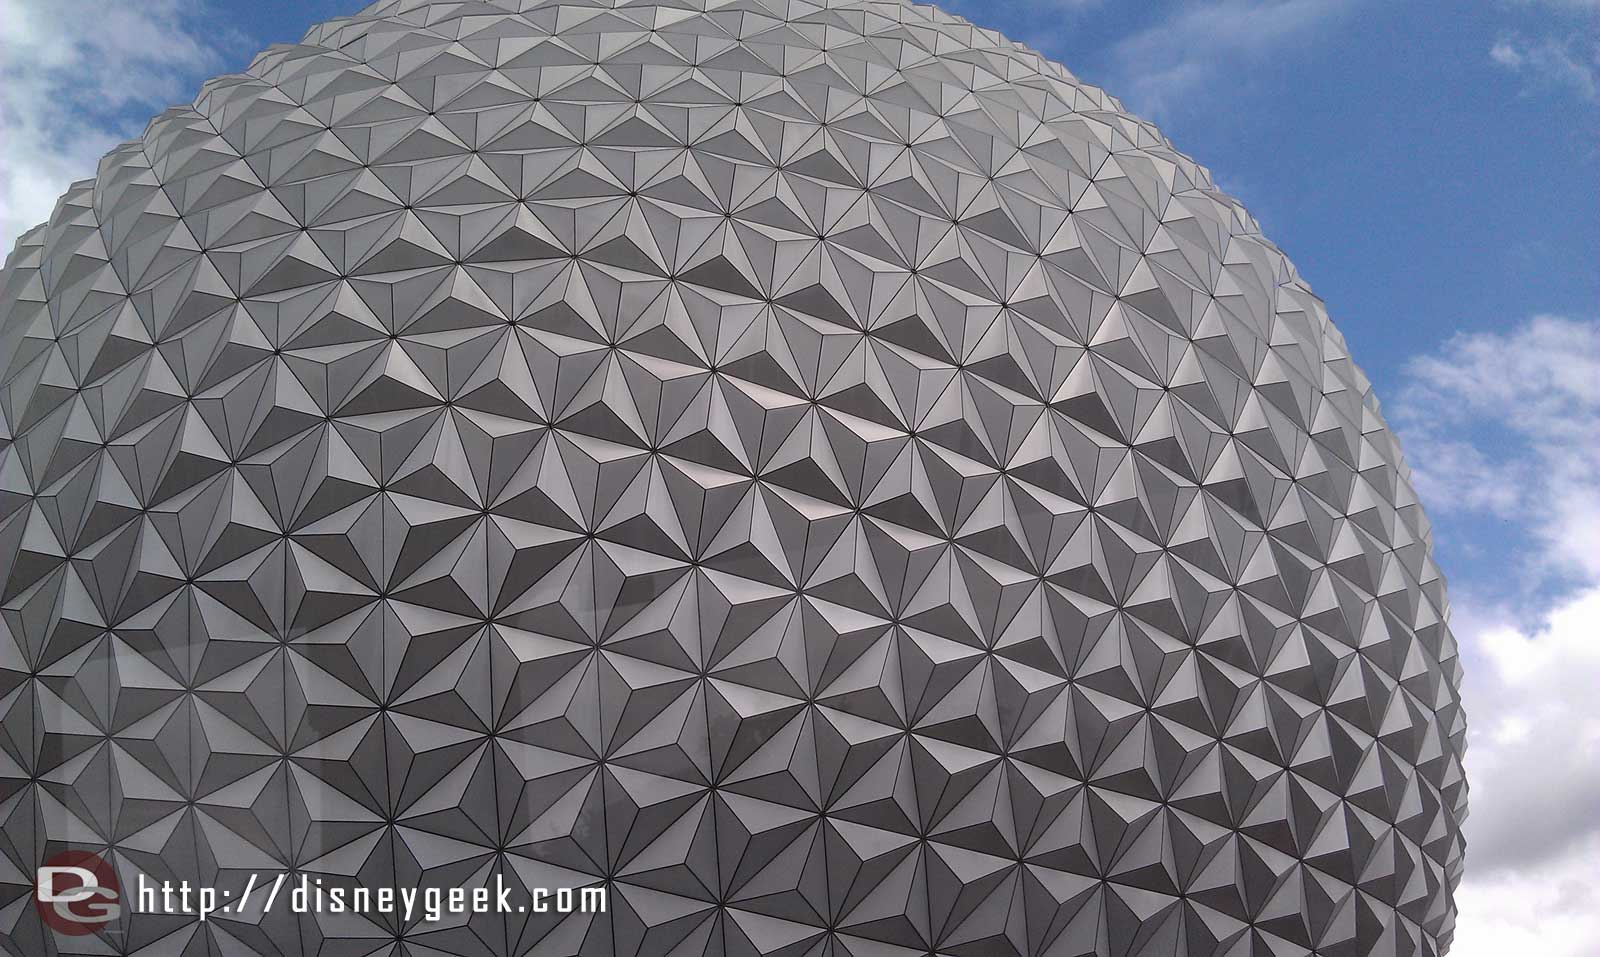 Spaceship Earth as we passed by on the Monorail